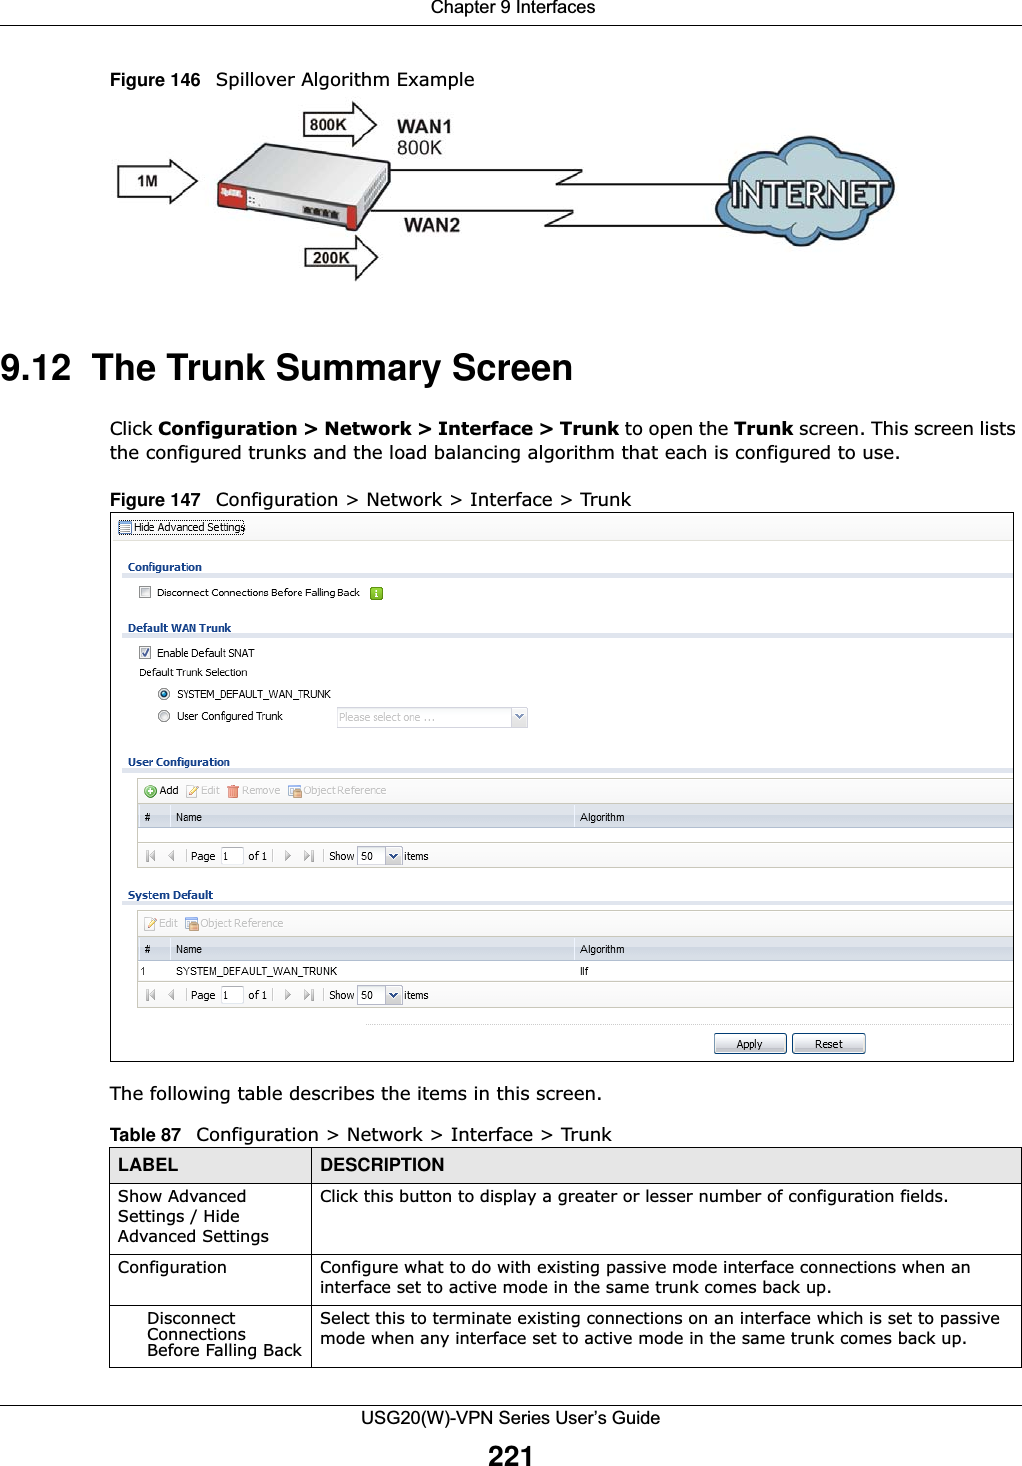  Chapter 9 InterfacesUSG20(W)-VPN Series User’s Guide221Figure 146   Spillover Algorithm Example9.12  The Trunk Summary ScreenClick Configuration &gt; Network &gt; Interface &gt; Trunk to open the Trunk screen. This screen lists the configured trunks and the load balancing algorithm that each is configured to use.Figure 147   Configuration &gt; Network &gt; Interface &gt; Trunk  The following table describes the items in this screen. Table 87   Configuration &gt; Network &gt; Interface &gt; TrunkLABEL DESCRIPTIONShow Advanced Settings / Hide Advanced SettingsClick this button to display a greater or lesser number of configuration fields.Configuration Configure what to do with existing passive mode interface connections when an interface set to active mode in the same trunk comes back up.Disconnect Connections Before Falling BackSelect this to terminate existing connections on an interface which is set to passive mode when any interface set to active mode in the same trunk comes back up.